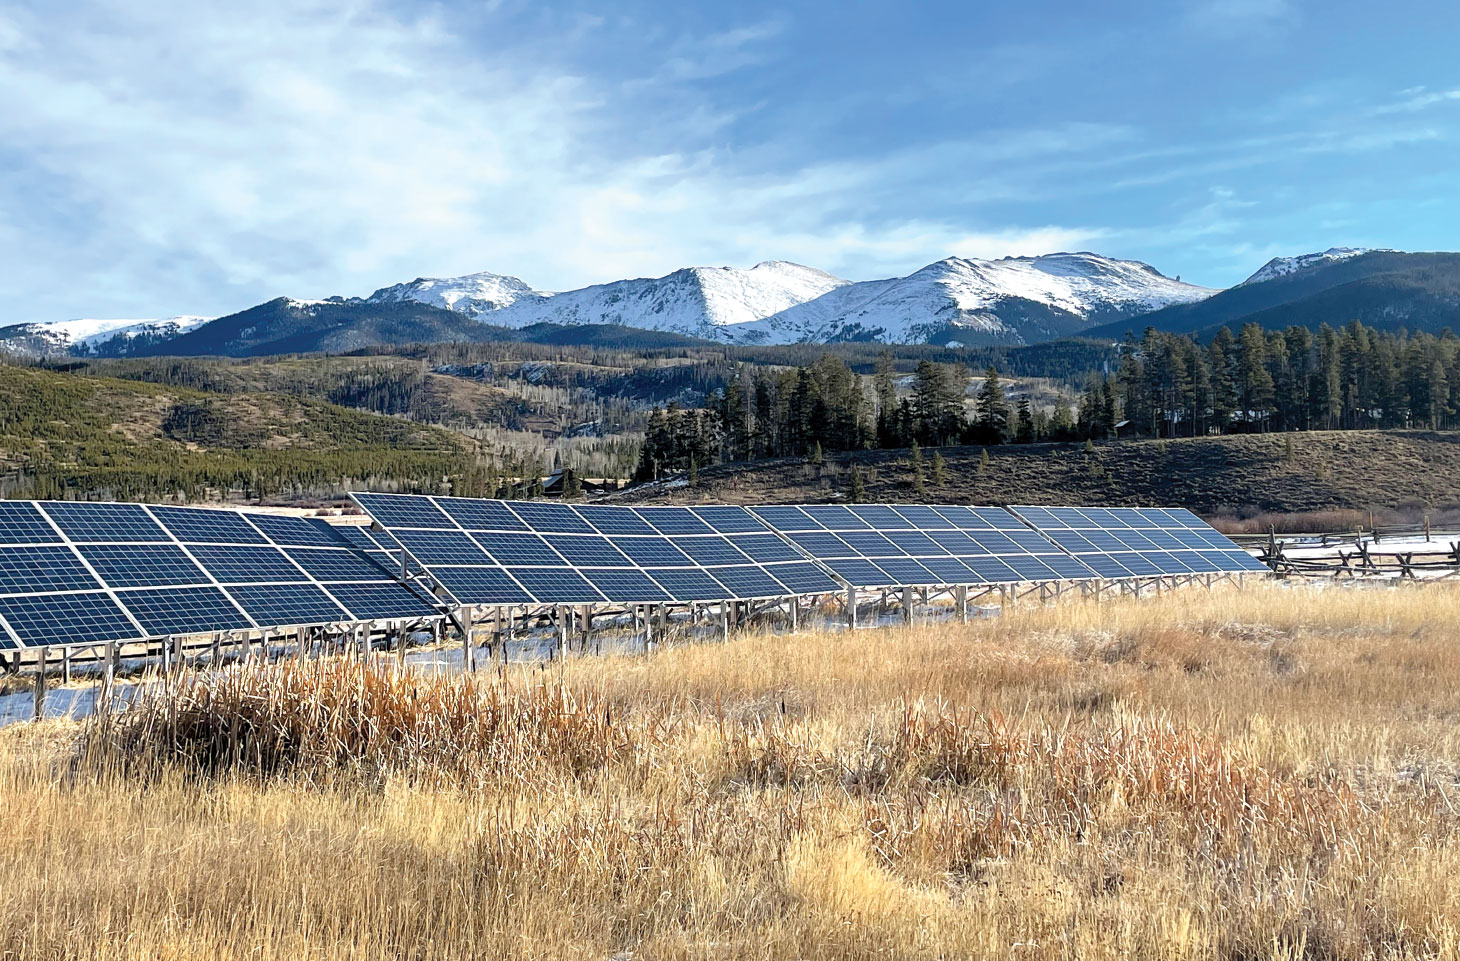 Solar panels with mountainside in background